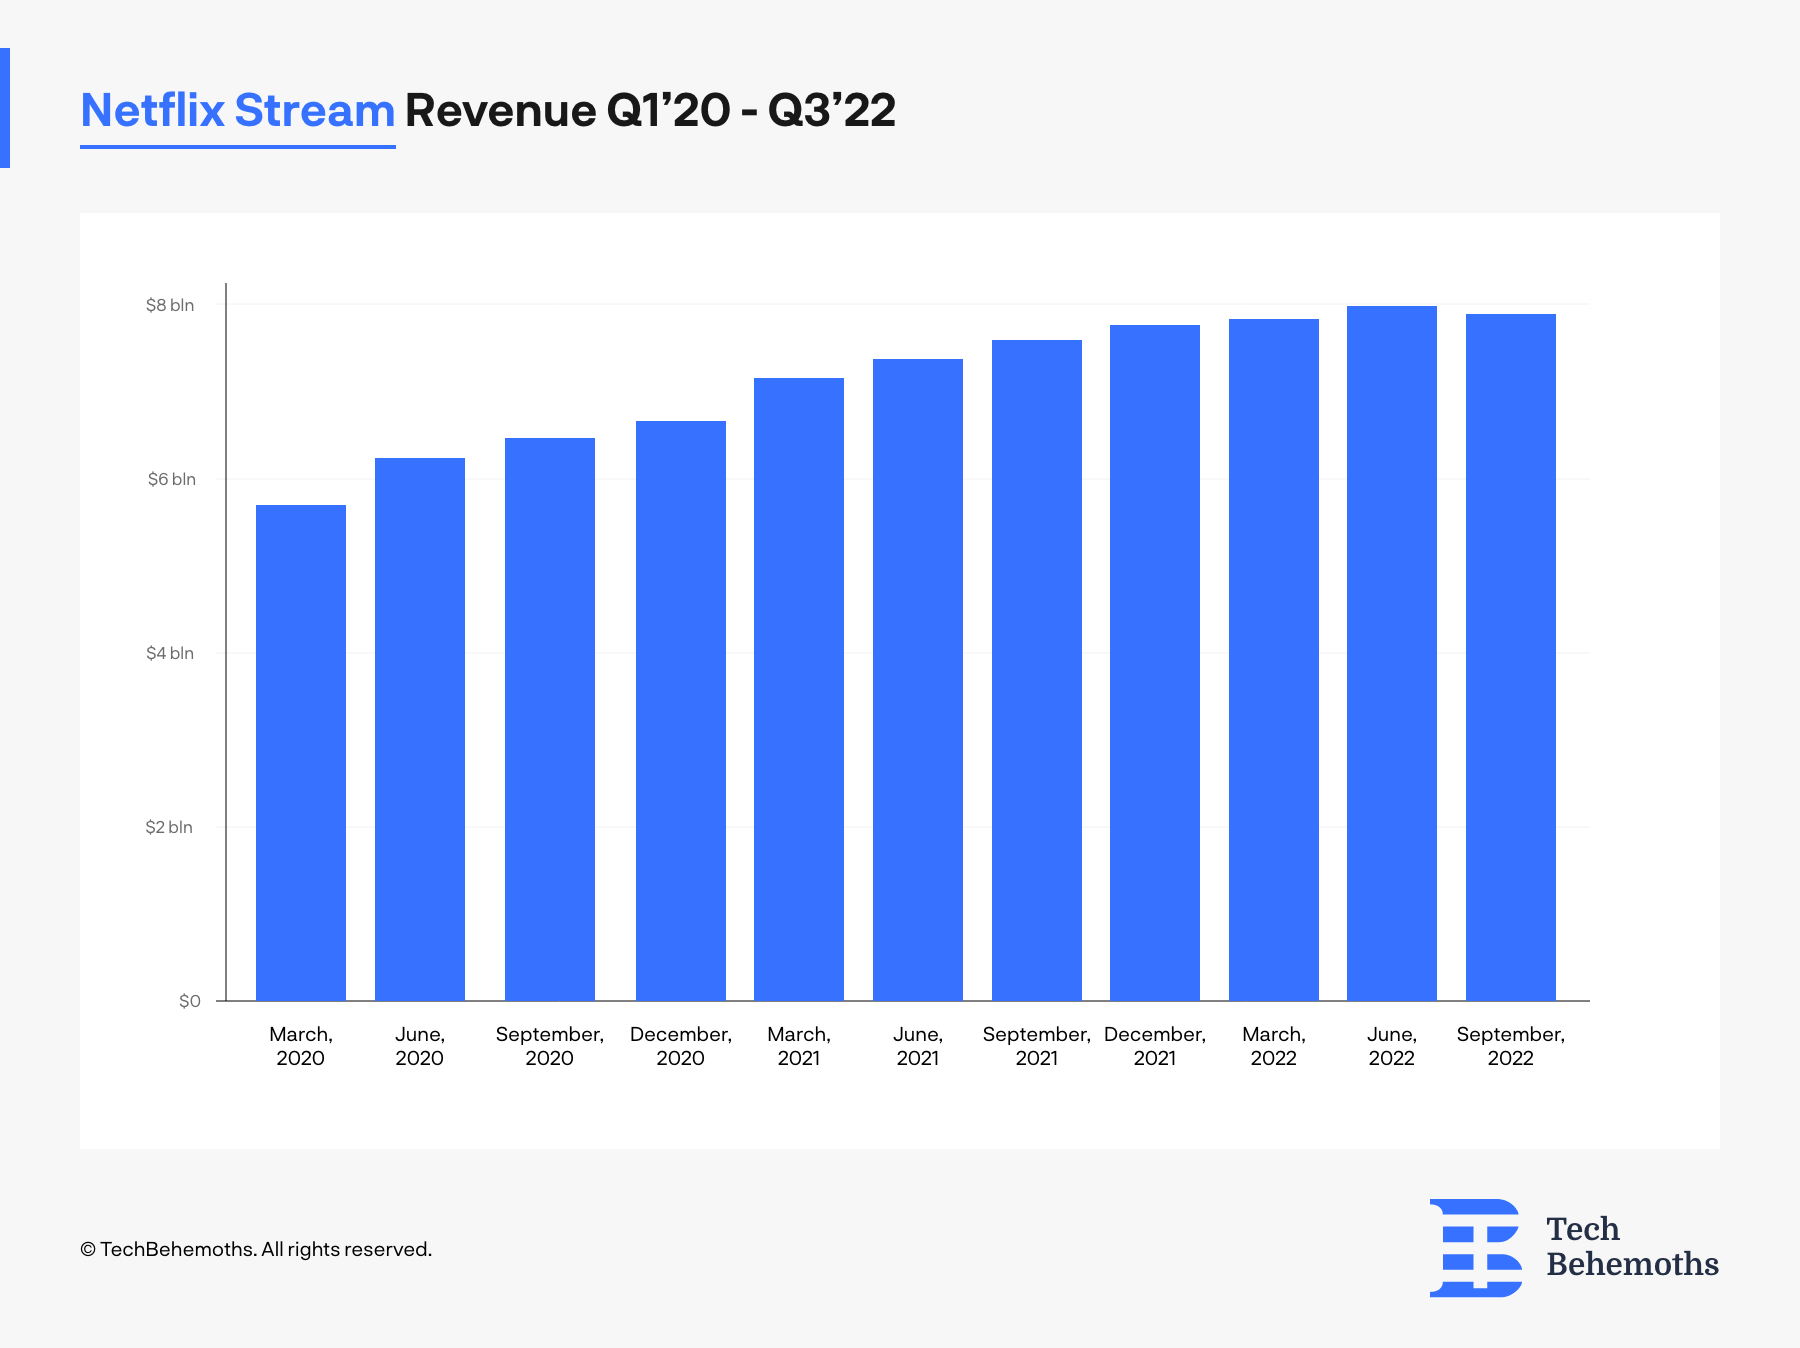 Netflix revenue from streaming services: Q1'20 - Q3'22